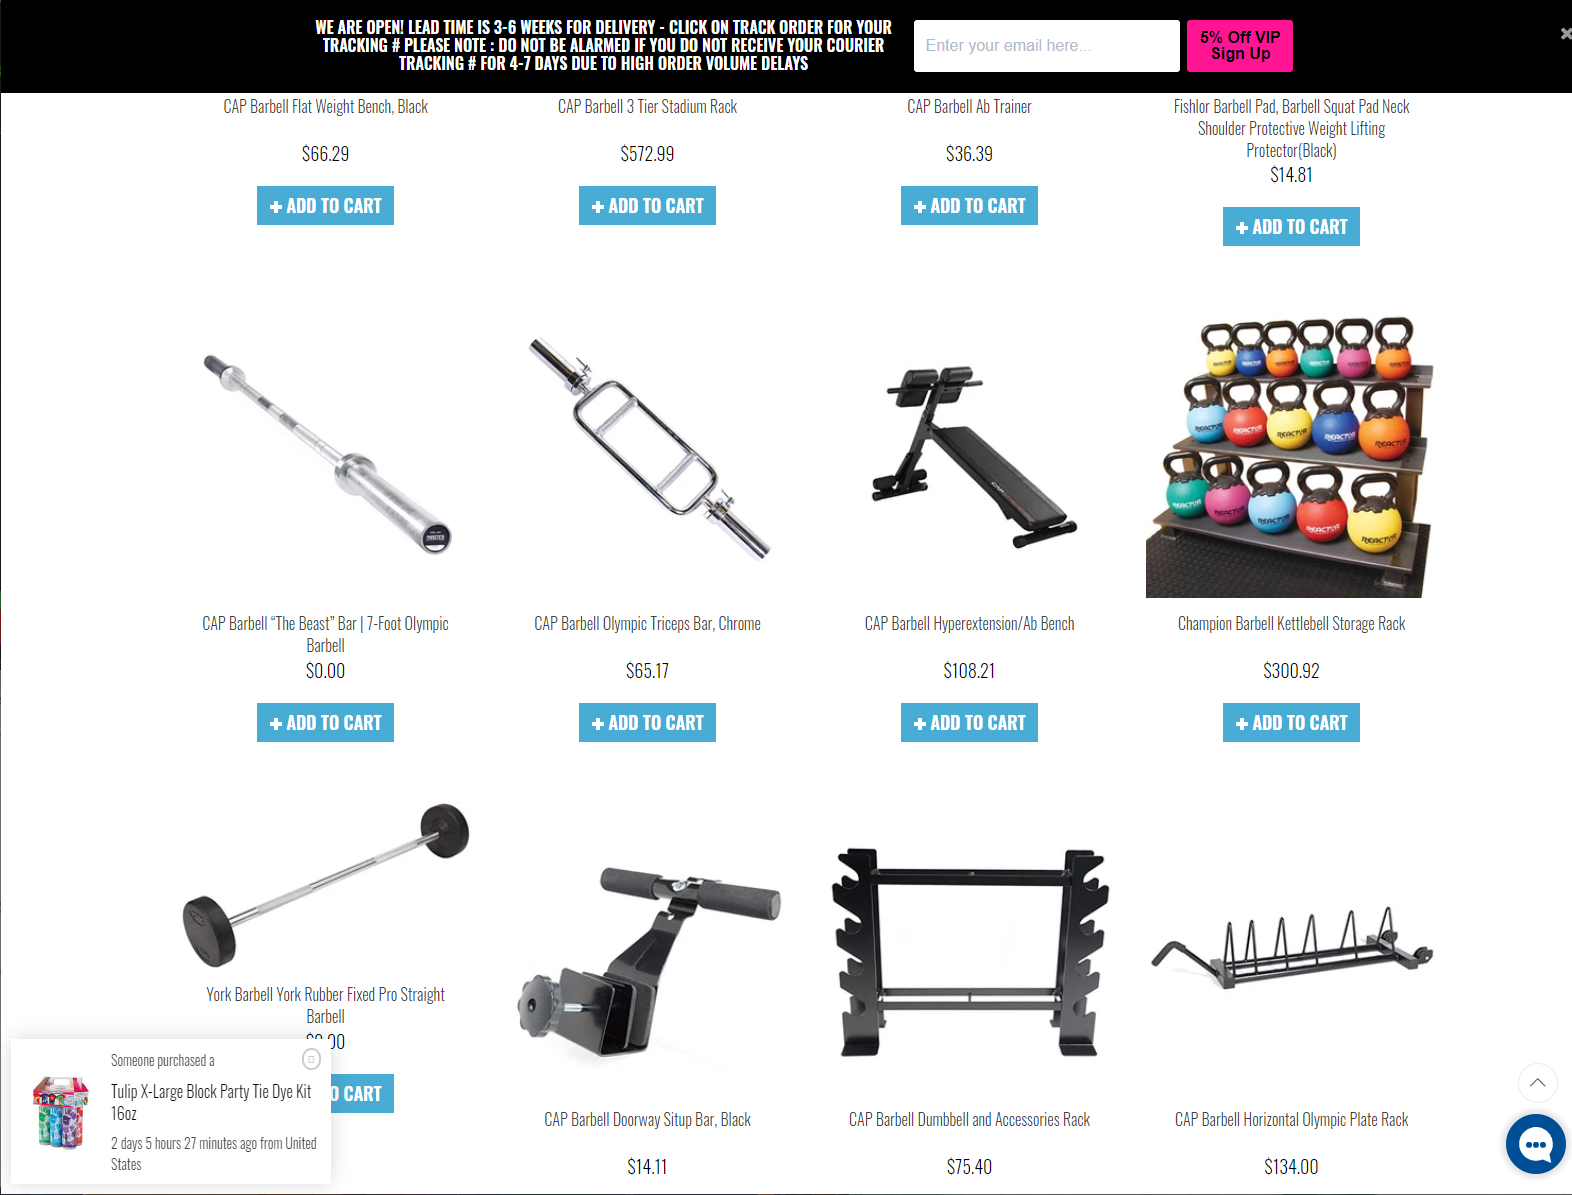 Here's the free barbell on their site